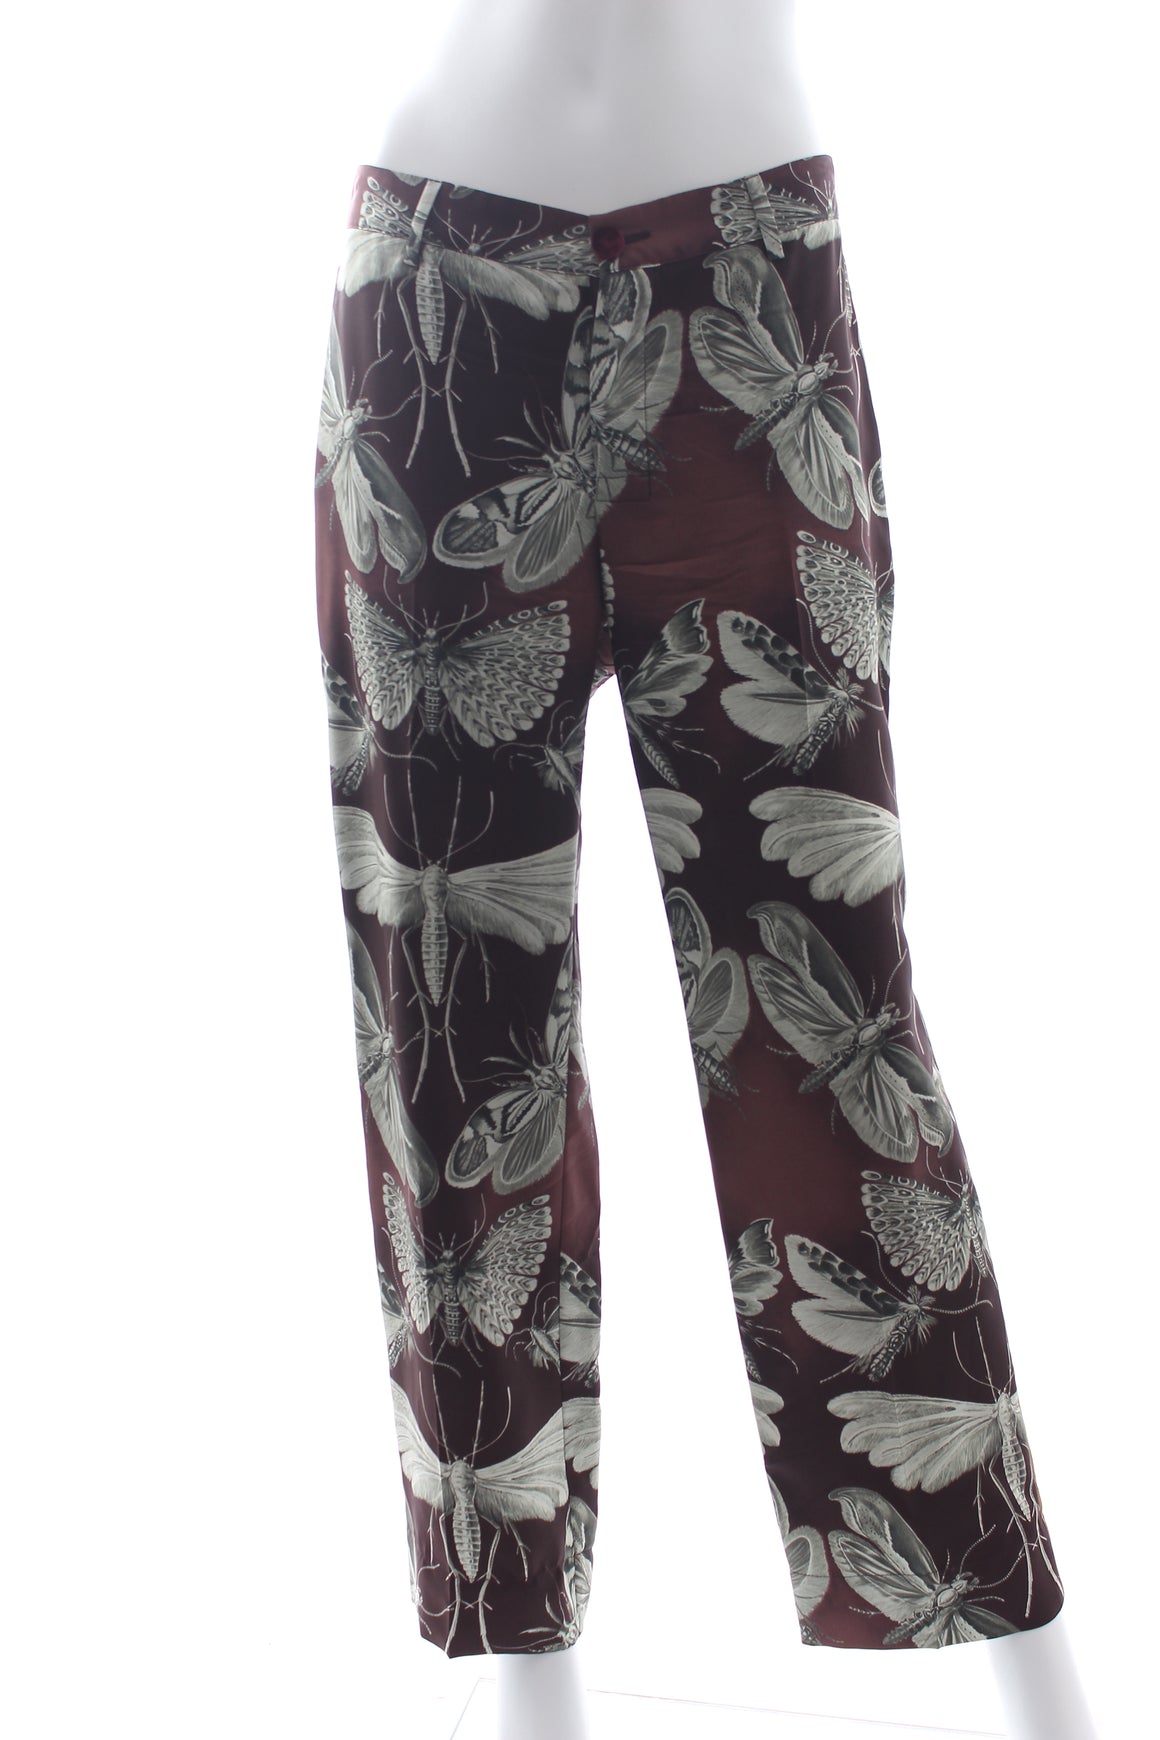 F.R.S For Restless Sleepers Silk Printed Trousers